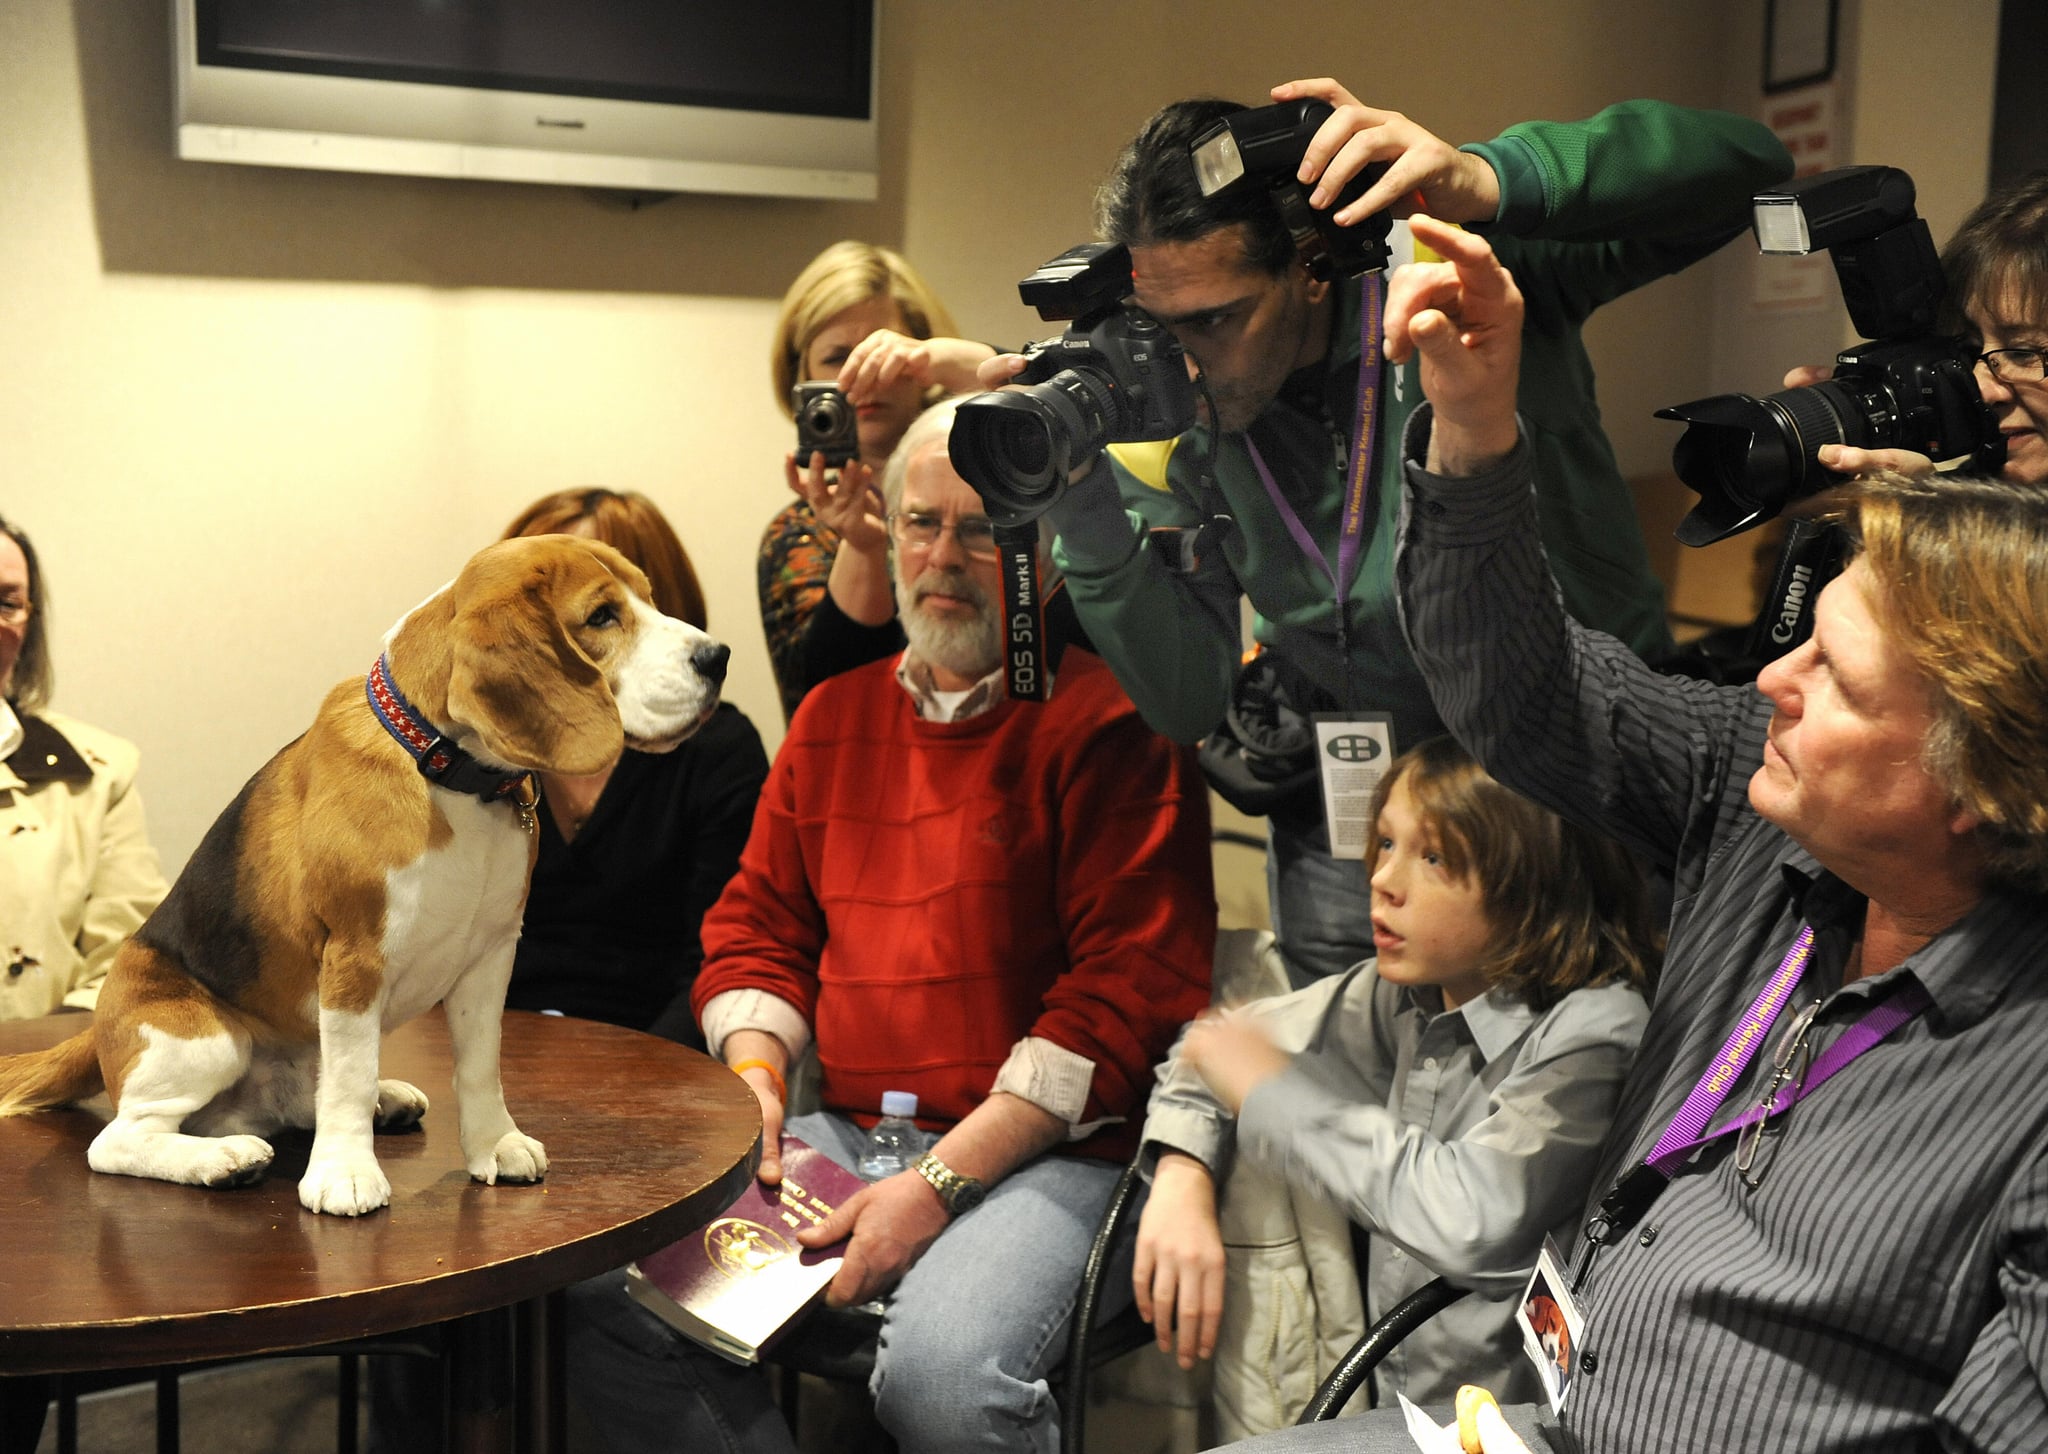 Cute Dogs From Behind-the-Scenes at the 2009 Westminster Kennel Club Dog Show ...